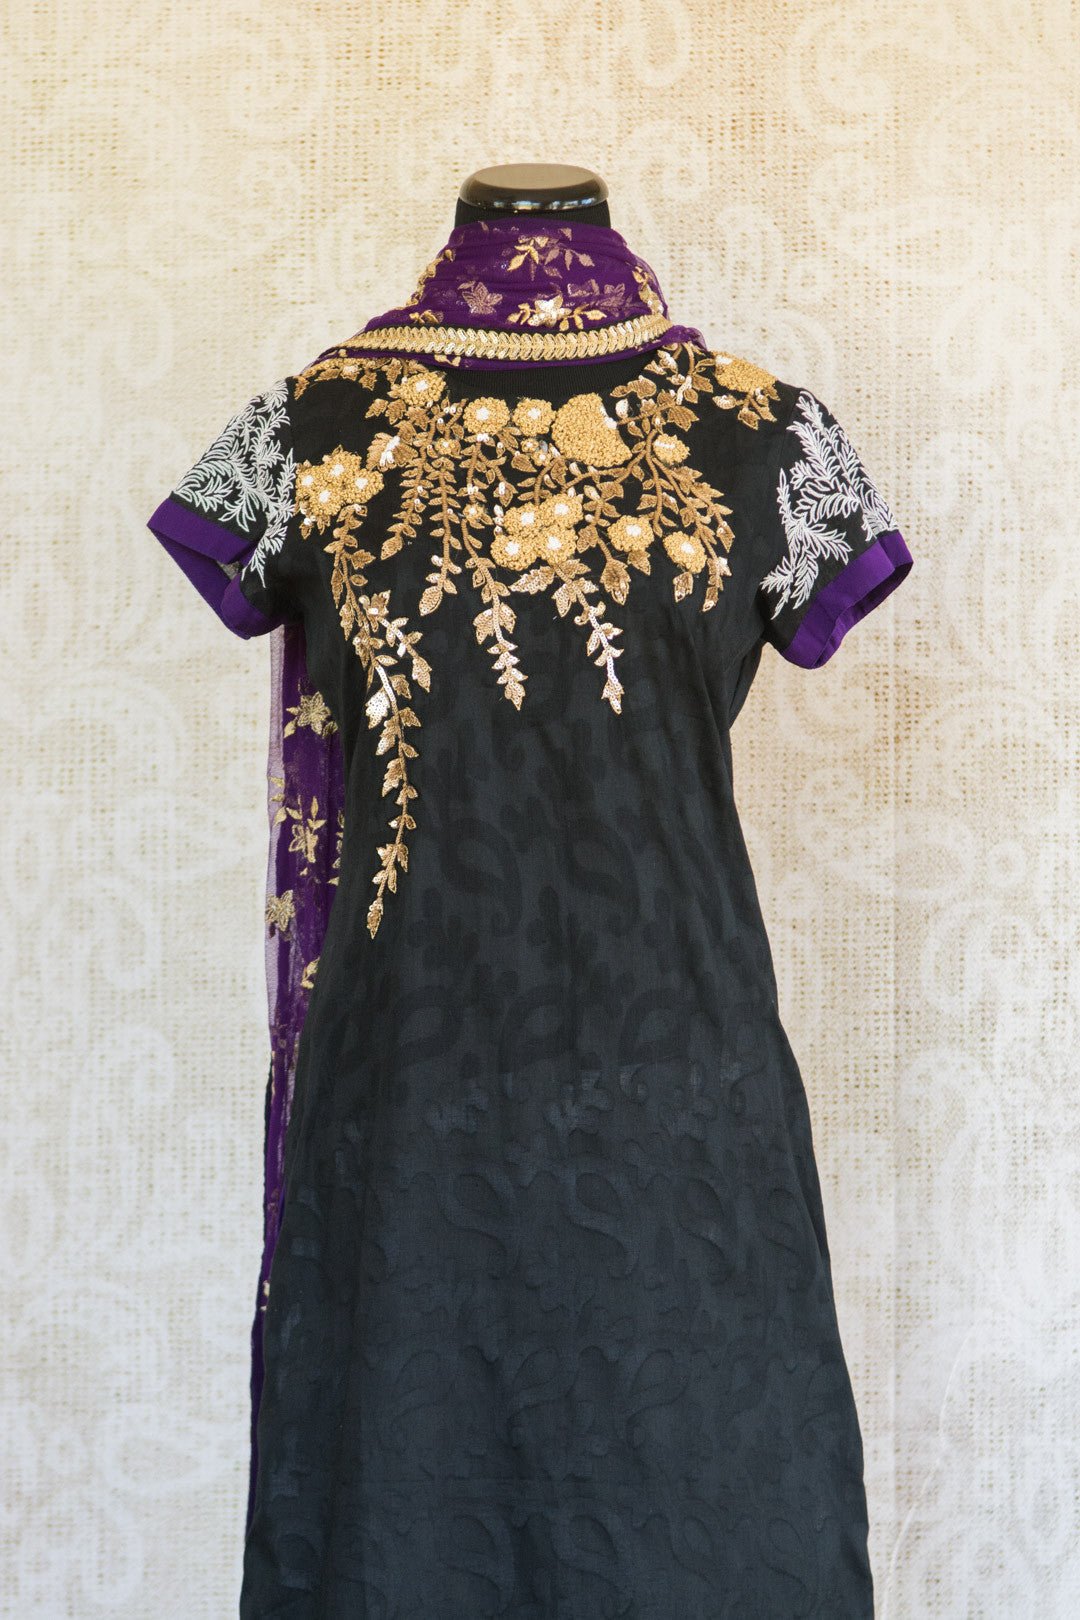 501076-suit-short-sleeve-black-purple-white-gold-silver-embroidery-scarf-top-view